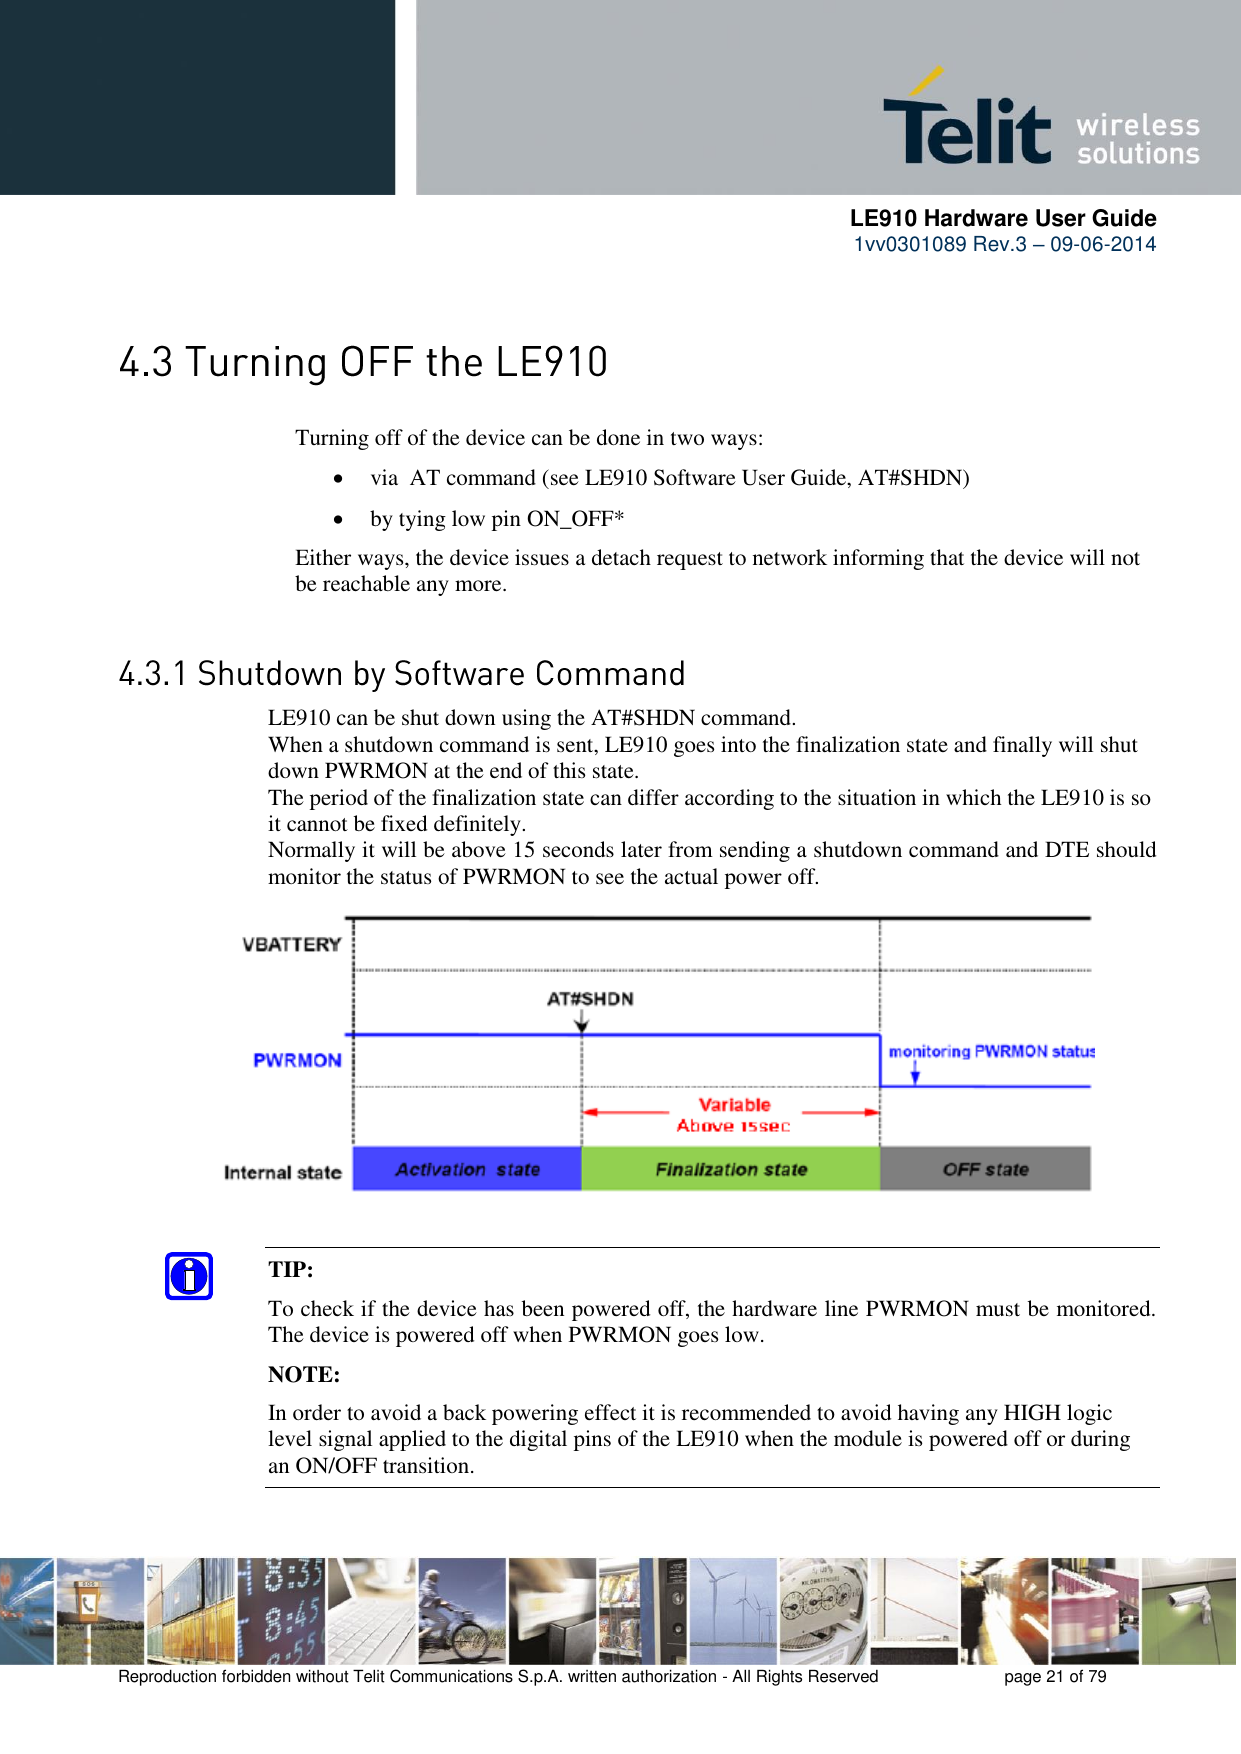      LE910 Hardware User Guide 1vv0301089 Rev.3 – 09-06-2014    Reproduction forbidden without Telit Communications S.p.A. written authorization - All Rights Reserved    page 21 of 79   Turning off of the device can be done in two ways:  via  AT command (see LE910 Software User Guide, AT#SHDN)  by tying low pin ON_OFF*   Either ways, the device issues a detach request to network informing that the device will not  be reachable any more.    LE910 can be shut down using the AT#SHDN command.  When a shutdown command is sent, LE910 goes into the finalization state and finally will shut down PWRMON at the end of this state.  The period of the finalization state can differ according to the situation in which the LE910 is so it cannot be fixed definitely.  Normally it will be above 15 seconds later from sending a shutdown command and DTE should monitor the status of PWRMON to see the actual power off.TIP:  To check if the device has been powered off, the hardware line PWRMON must be monitored. The device is powered off when PWRMON goes low.NOTE: In order to avoid a back powering effect it is recommended to avoid having any HIGH logic level signal applied to the digital pins of the LE910 when the module is powered off or during an ON/OFF transition. 